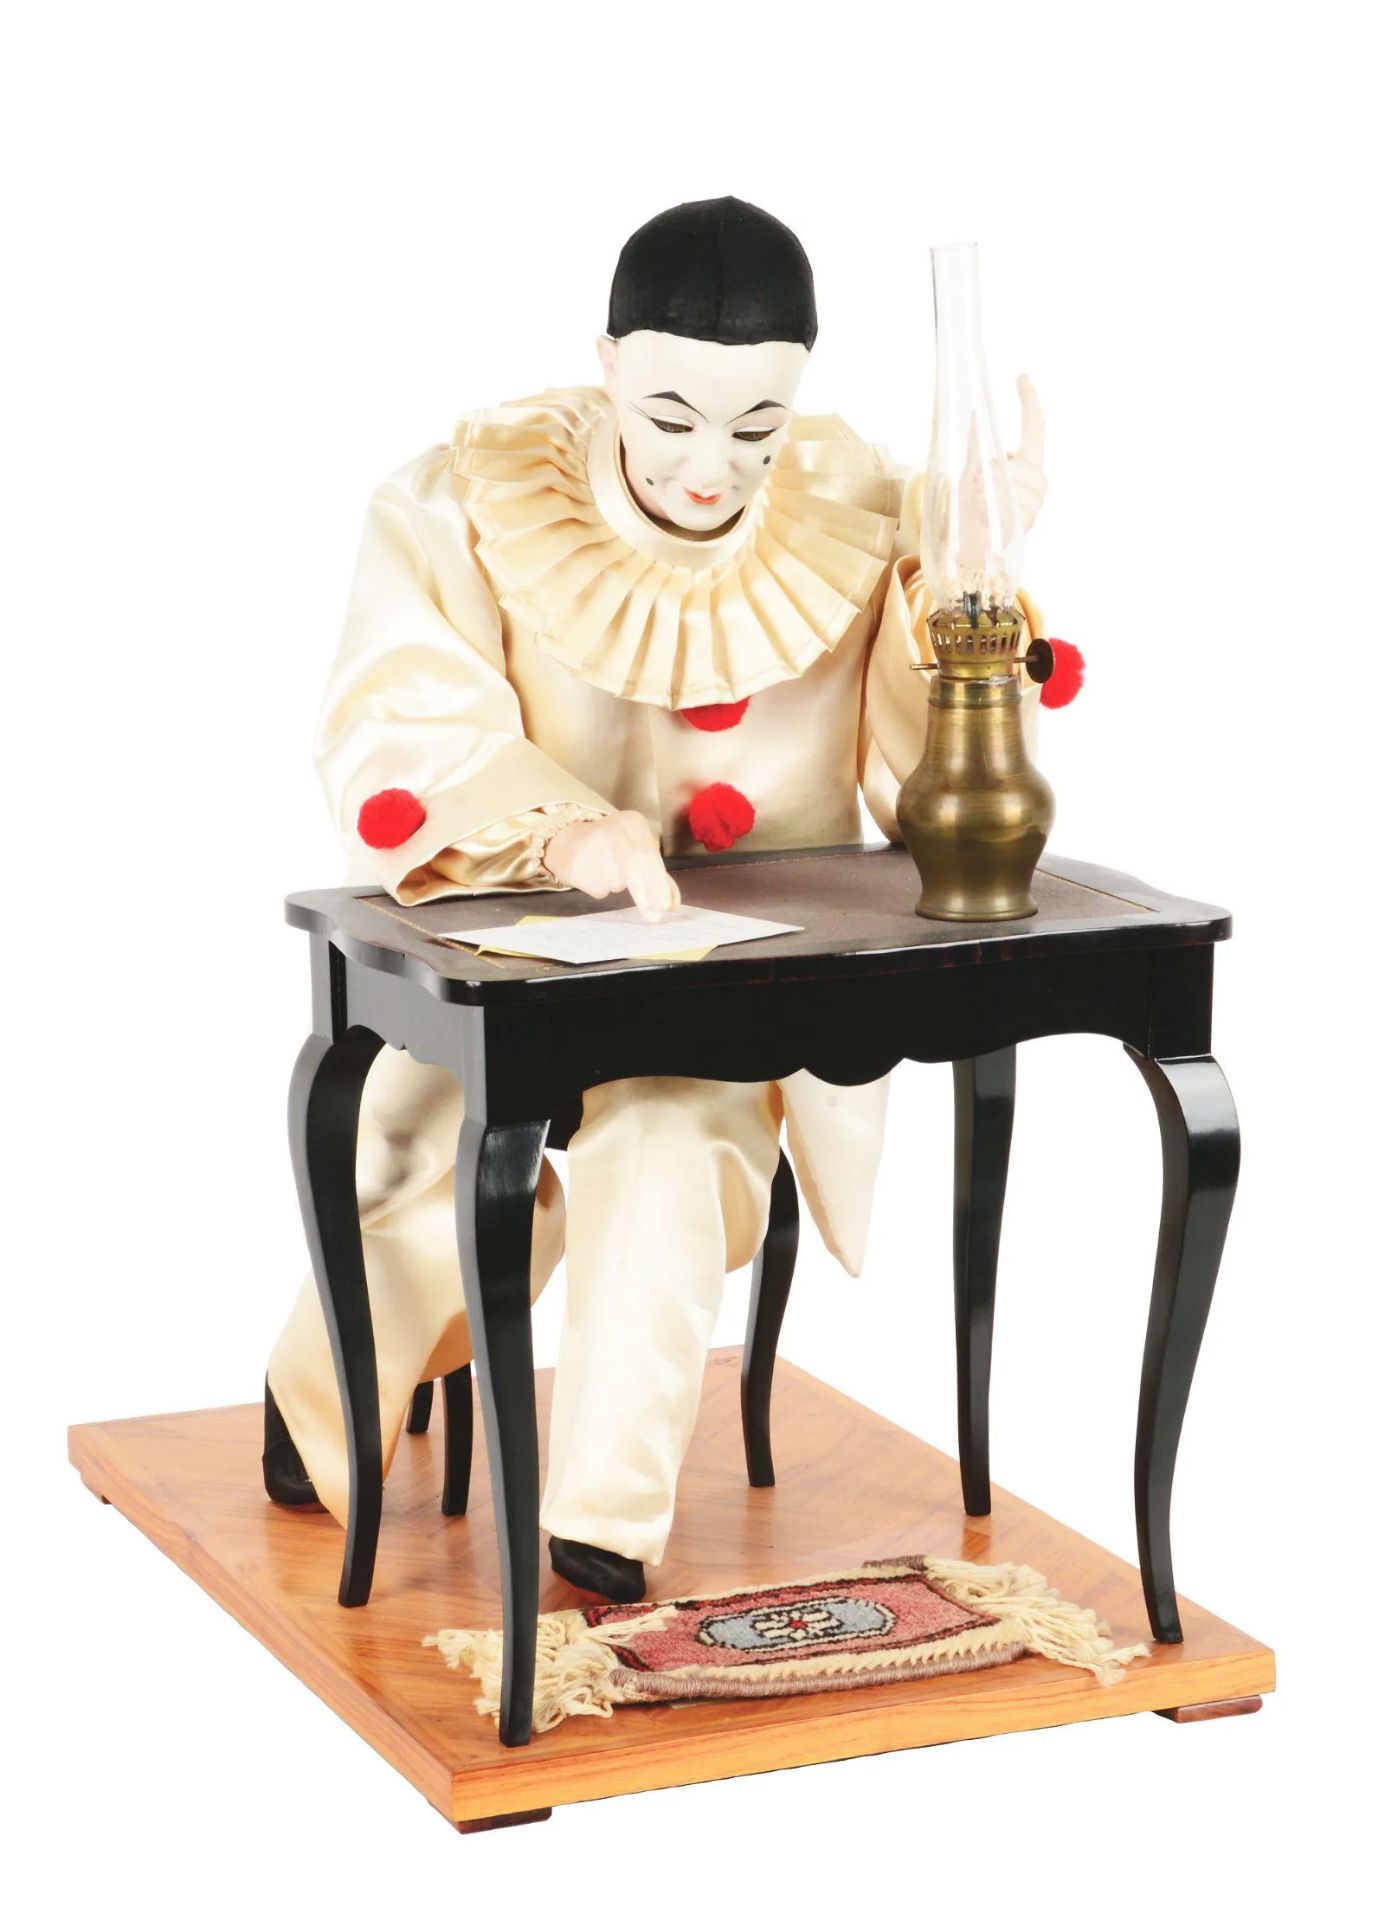 "Pierrot Ecrivain" Musical Automaton made by Christian Bailly